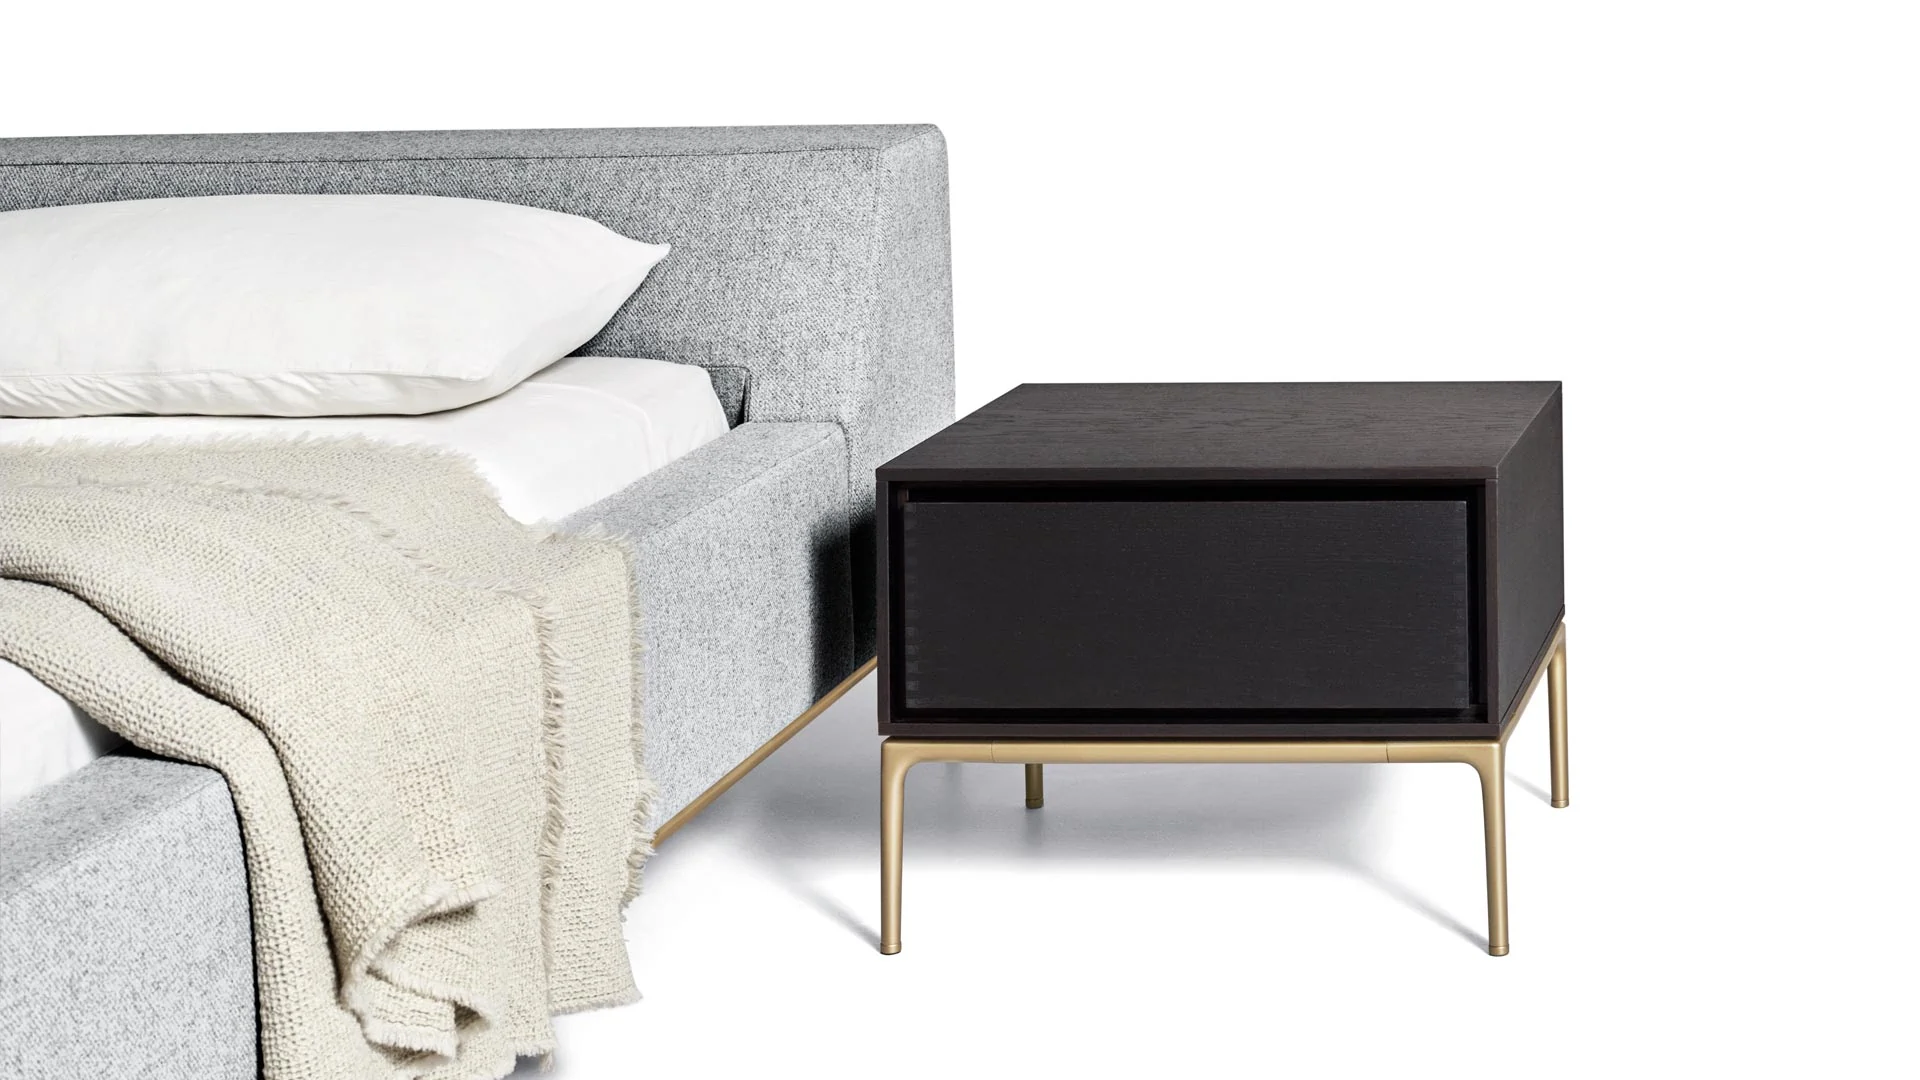 Time Trip For Memories - Bed Side Table ēdition